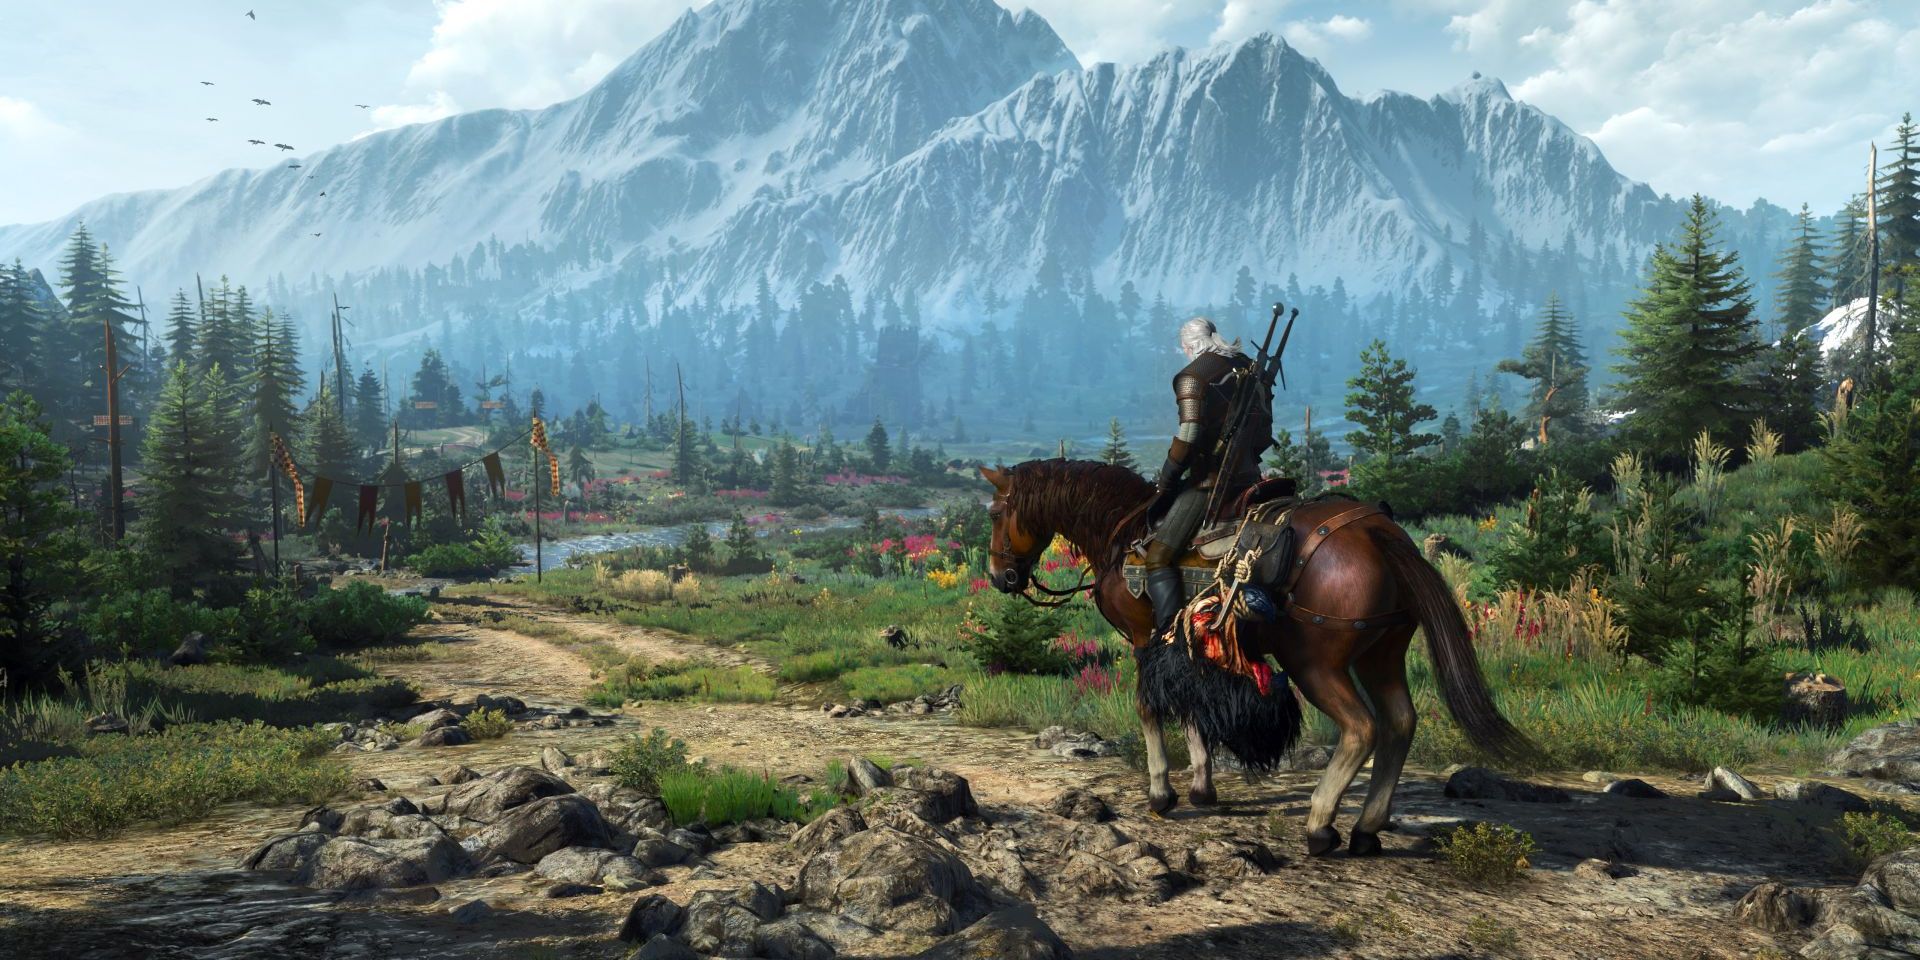 The Witcher 3: Wild Hunt - PCGamingWiki PCGW - bugs, fixes, crashes, mods,  guides and improvements for every PC game